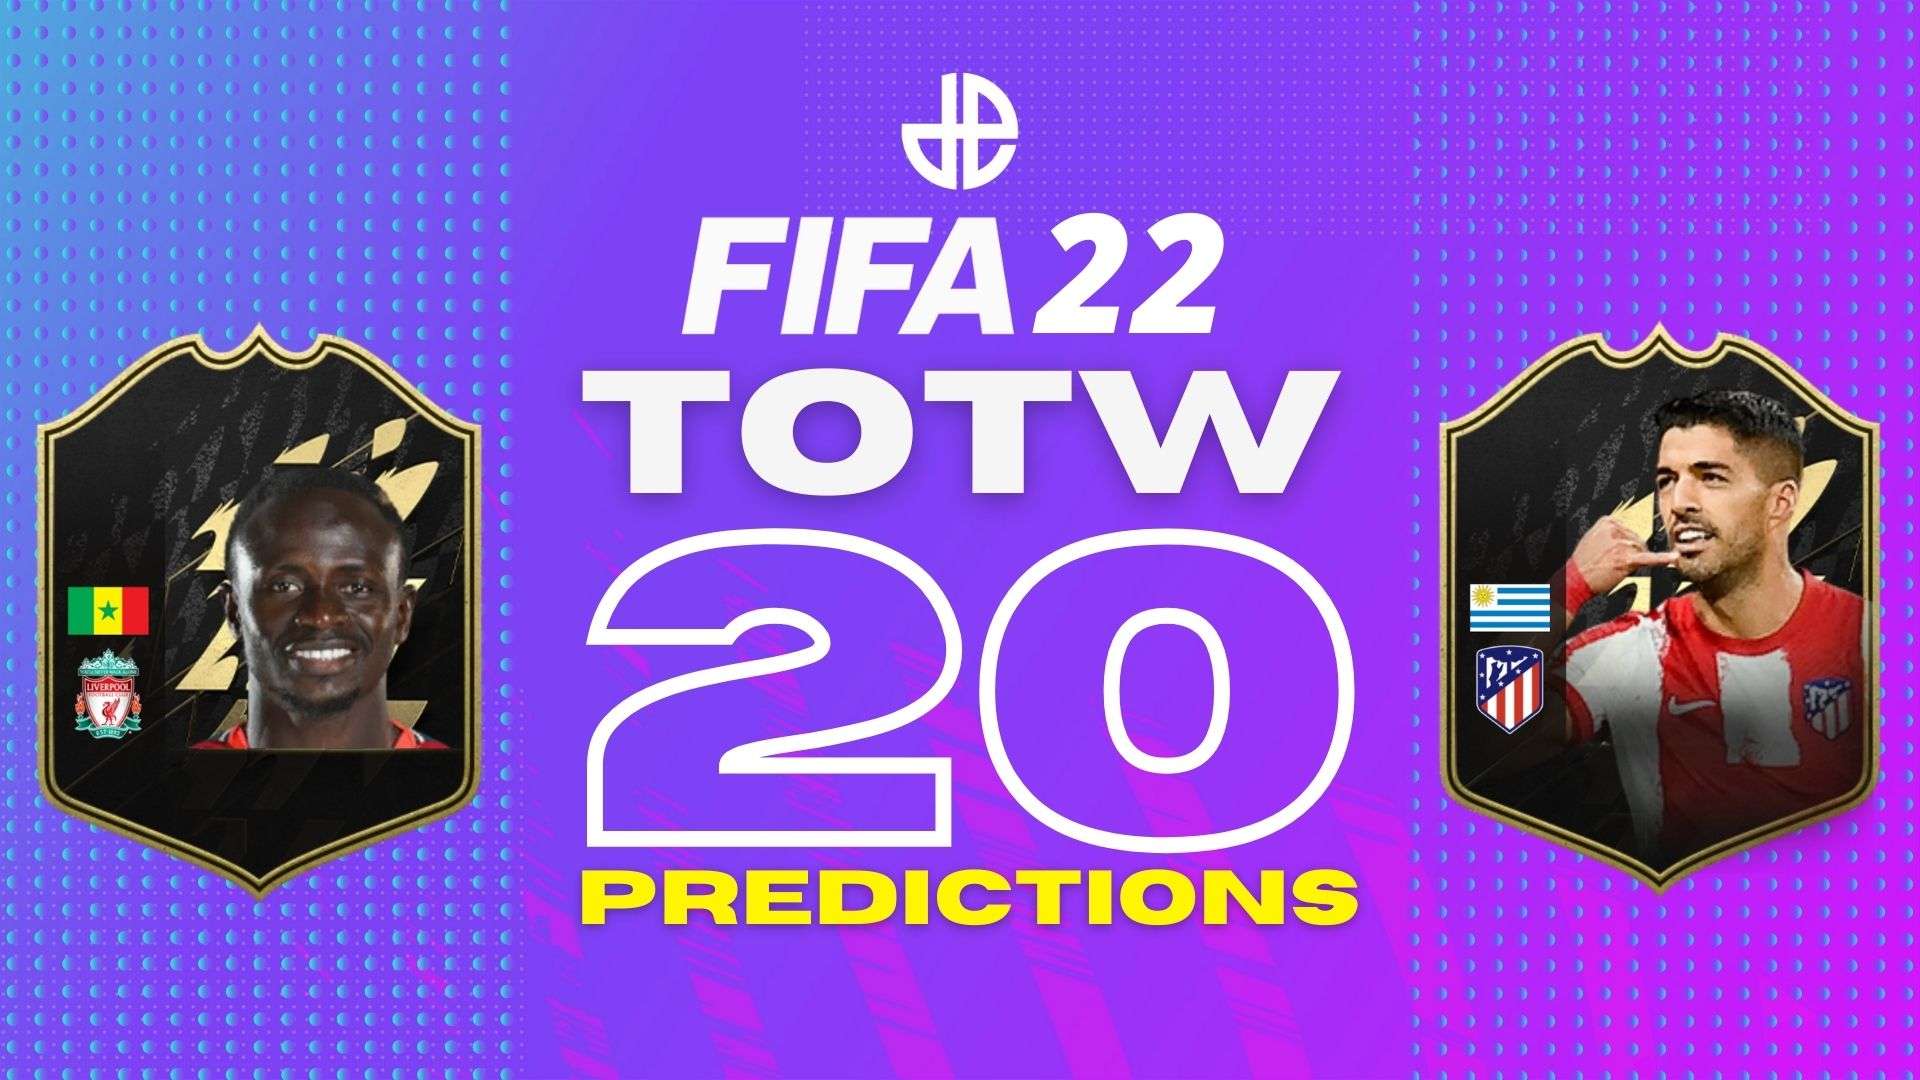 FIFA 22 TOTW 20 cards and predictions